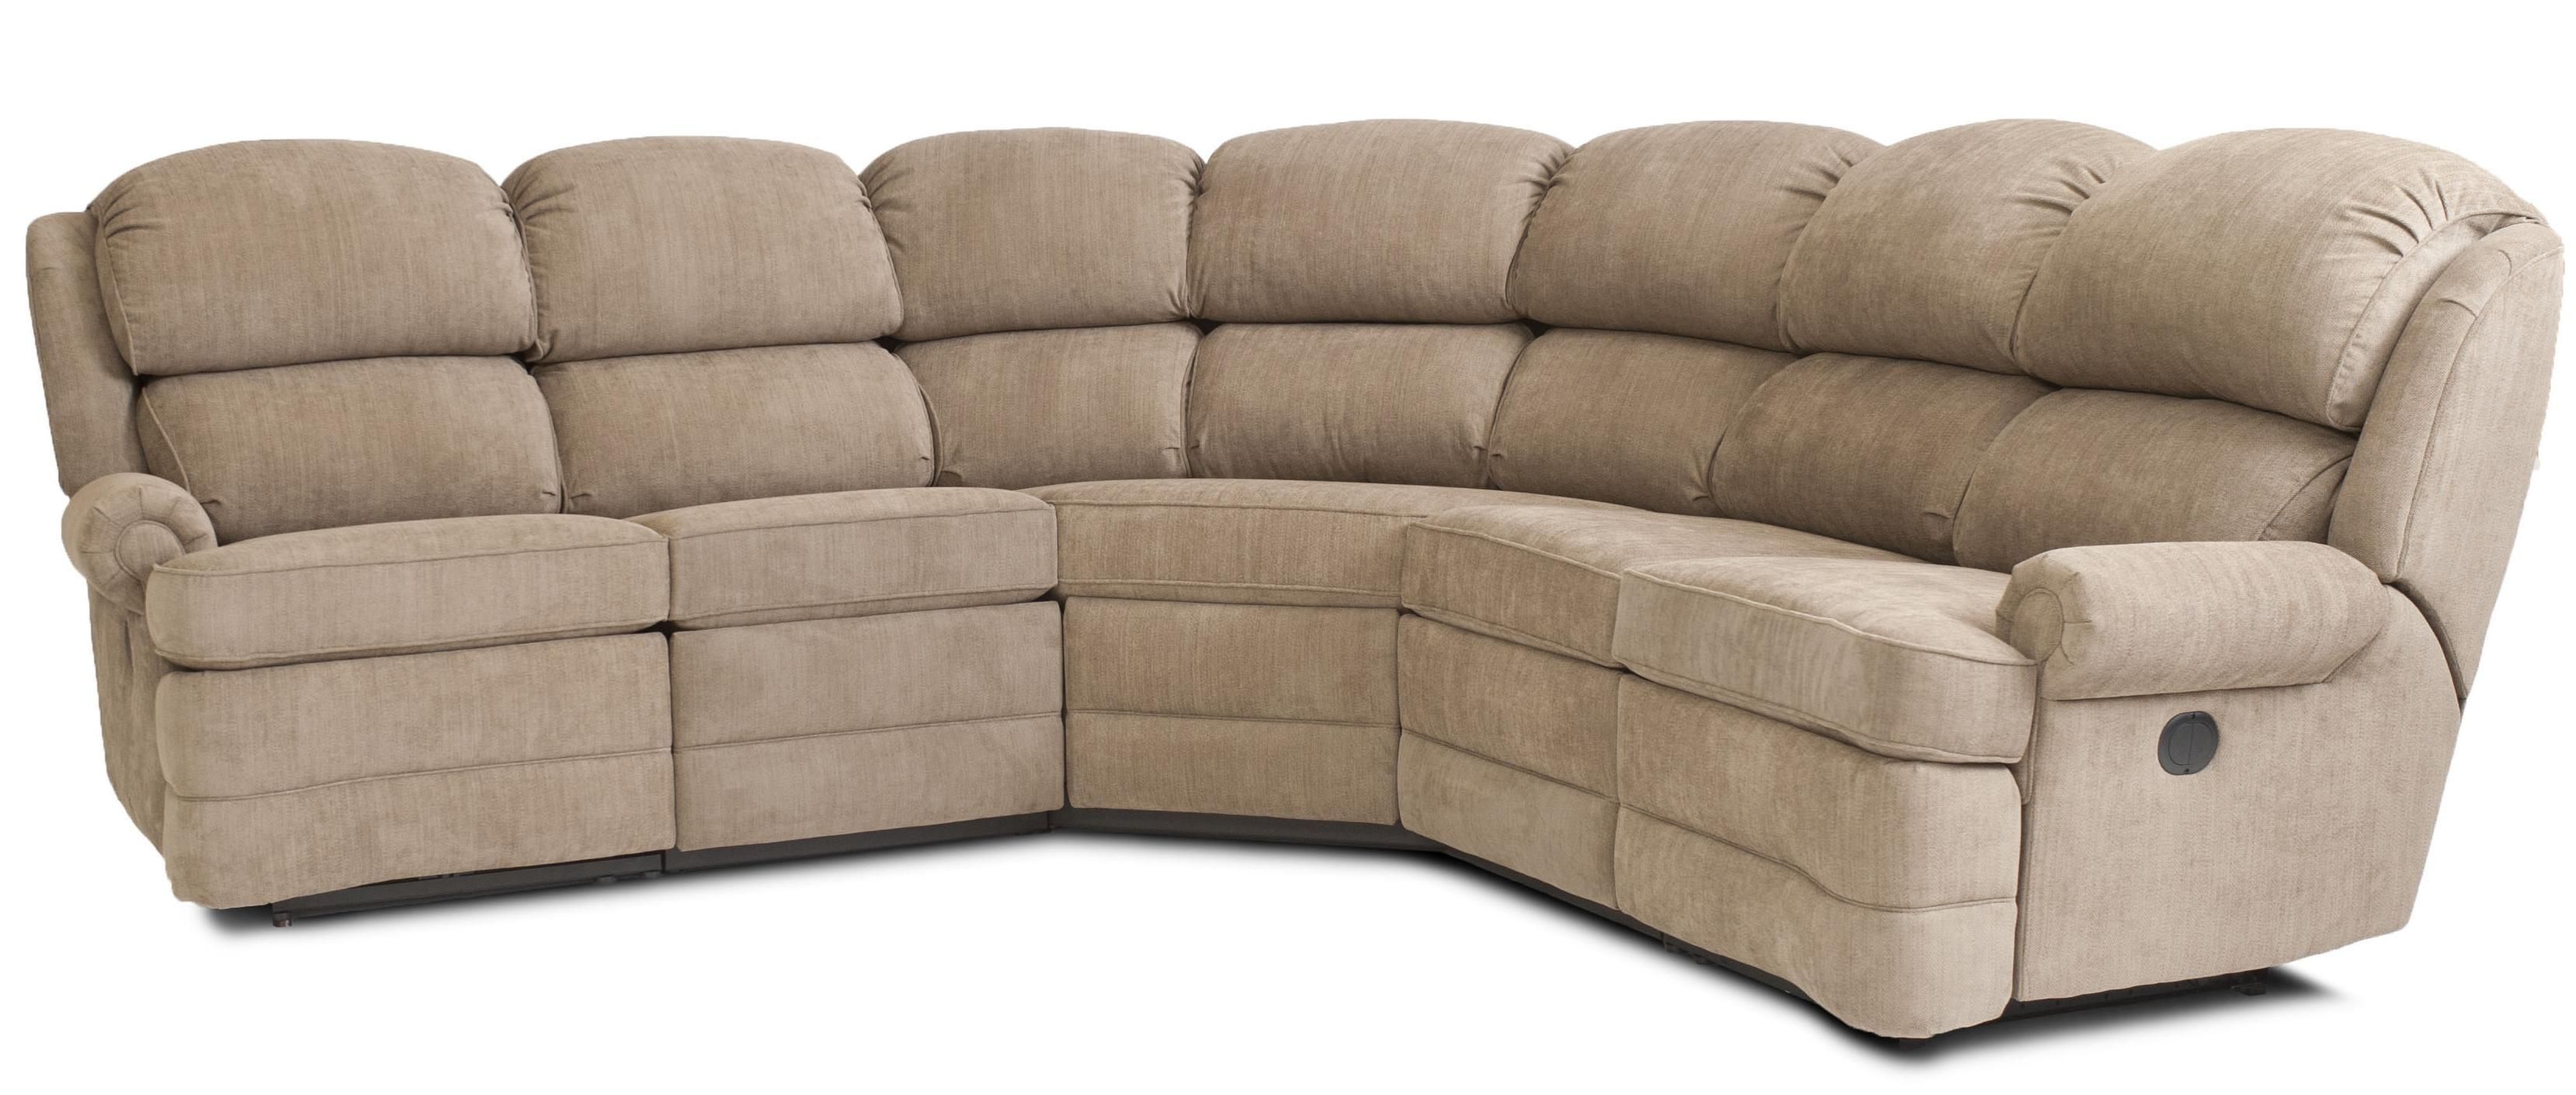 Furniture: Reclining Sectional Sofas For Small Spaces | Reclining For Sectional Sofas For Small Spaces With Recliners (View 15 of 20)